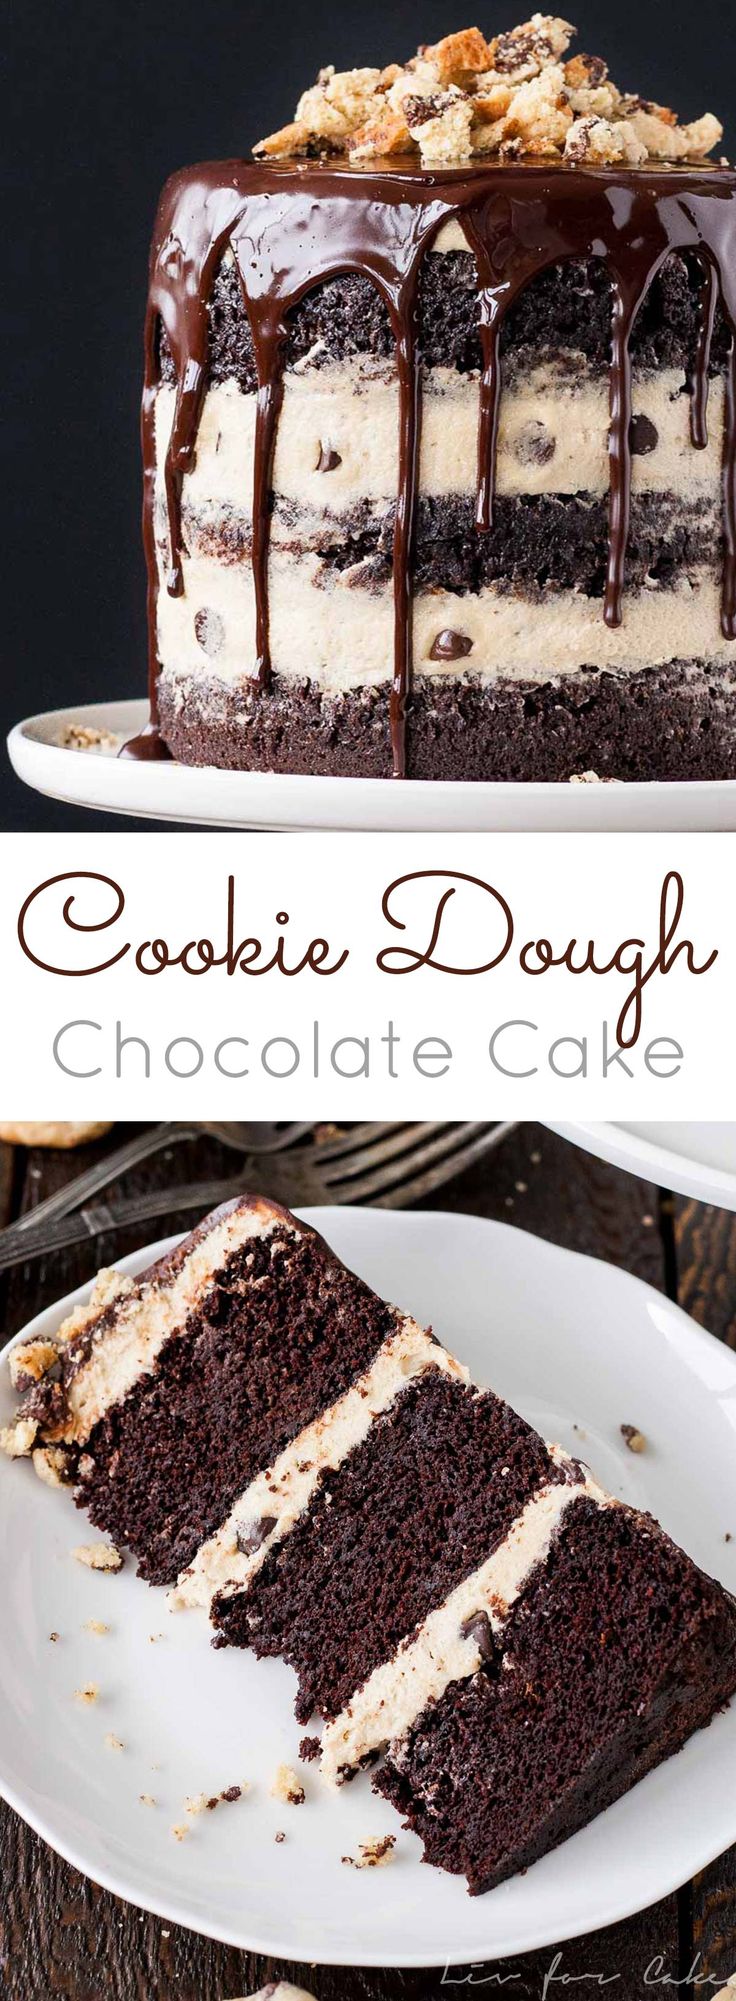 combine classic chocolate cake with your favourite guilty pleasure in this cookie dough chocolate cake